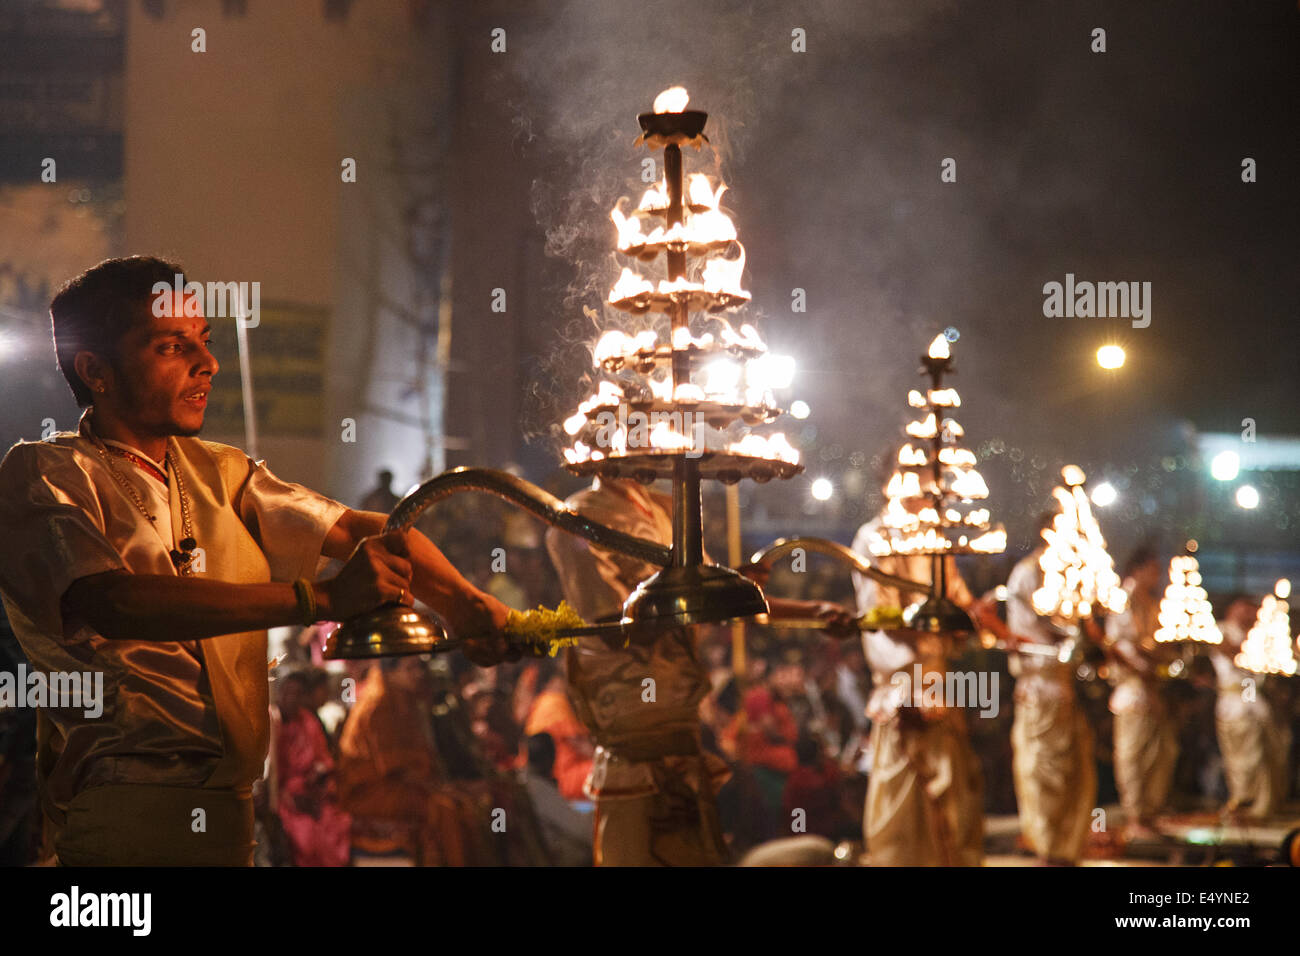 Evening Ganga Aarti (aarthi) Hindu religious spiritual ritual and ceremony with fire and smoke offerings in Varanasi, India Stock Photo